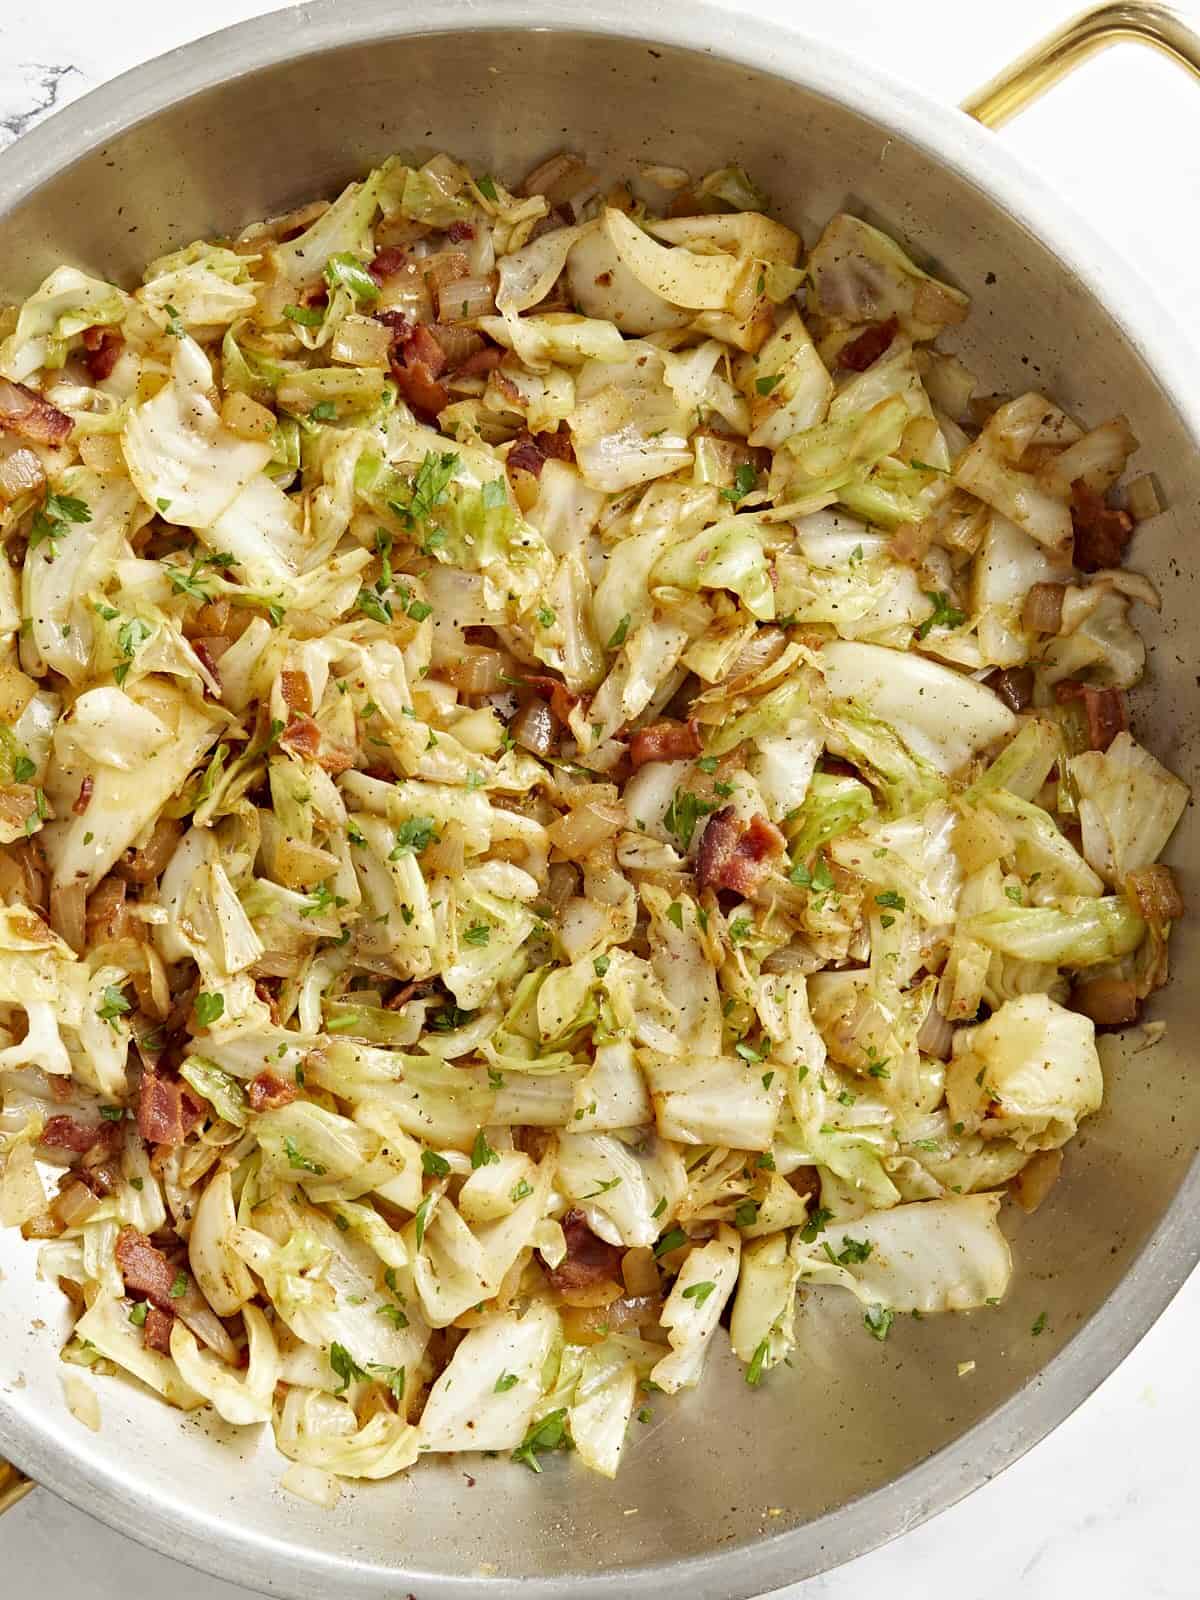 Overhead view of fried cabbage in a skillet.